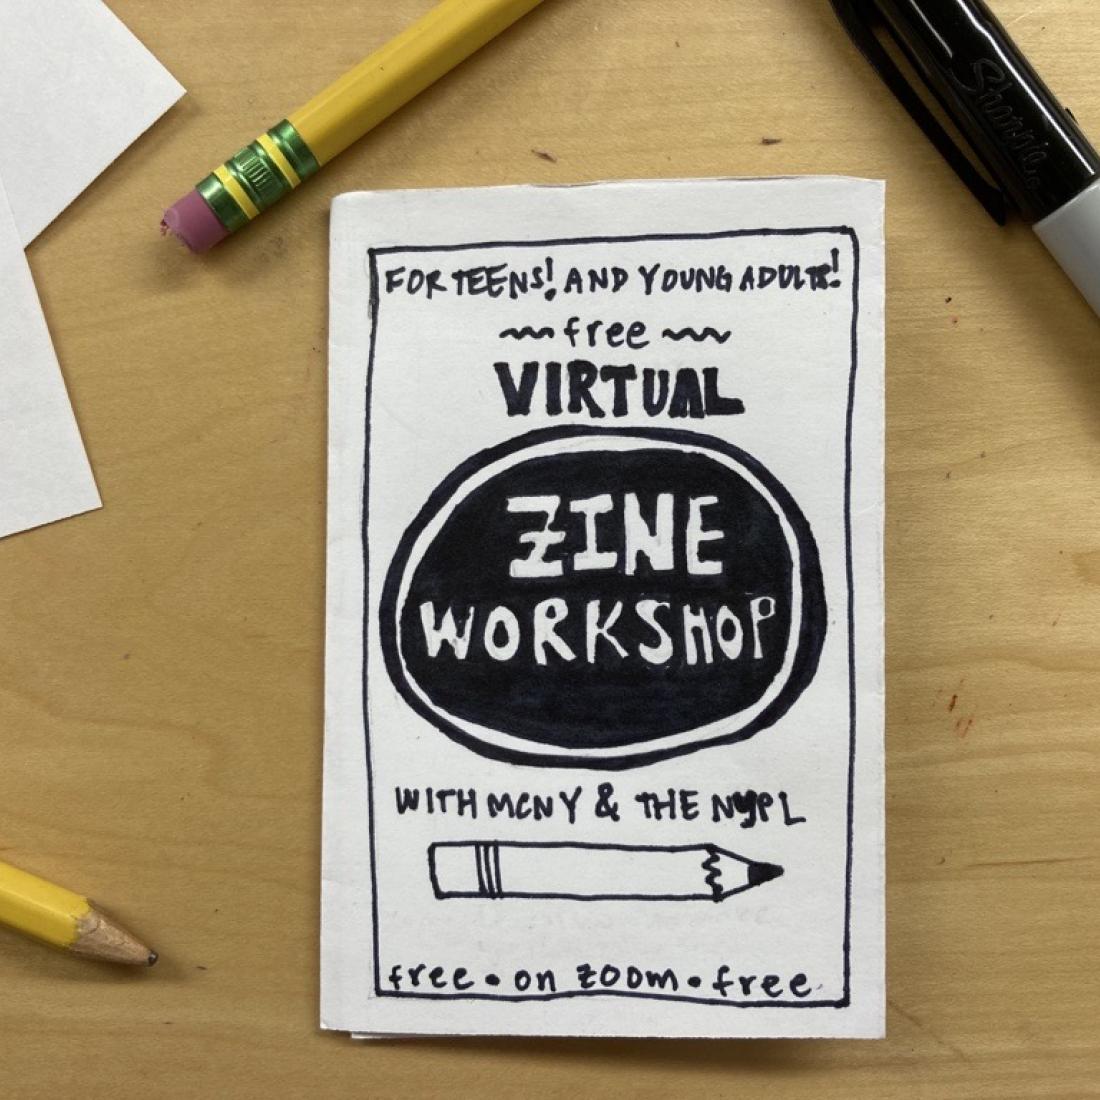 Photograph of a zine that says "For Teens! And Young Adults! VIRTUAL ZINE WORKSHOP WITH MCNY AND THE NYPL. free. on zoom. free." The zine is on a desk with paper, pencils, and a marker.